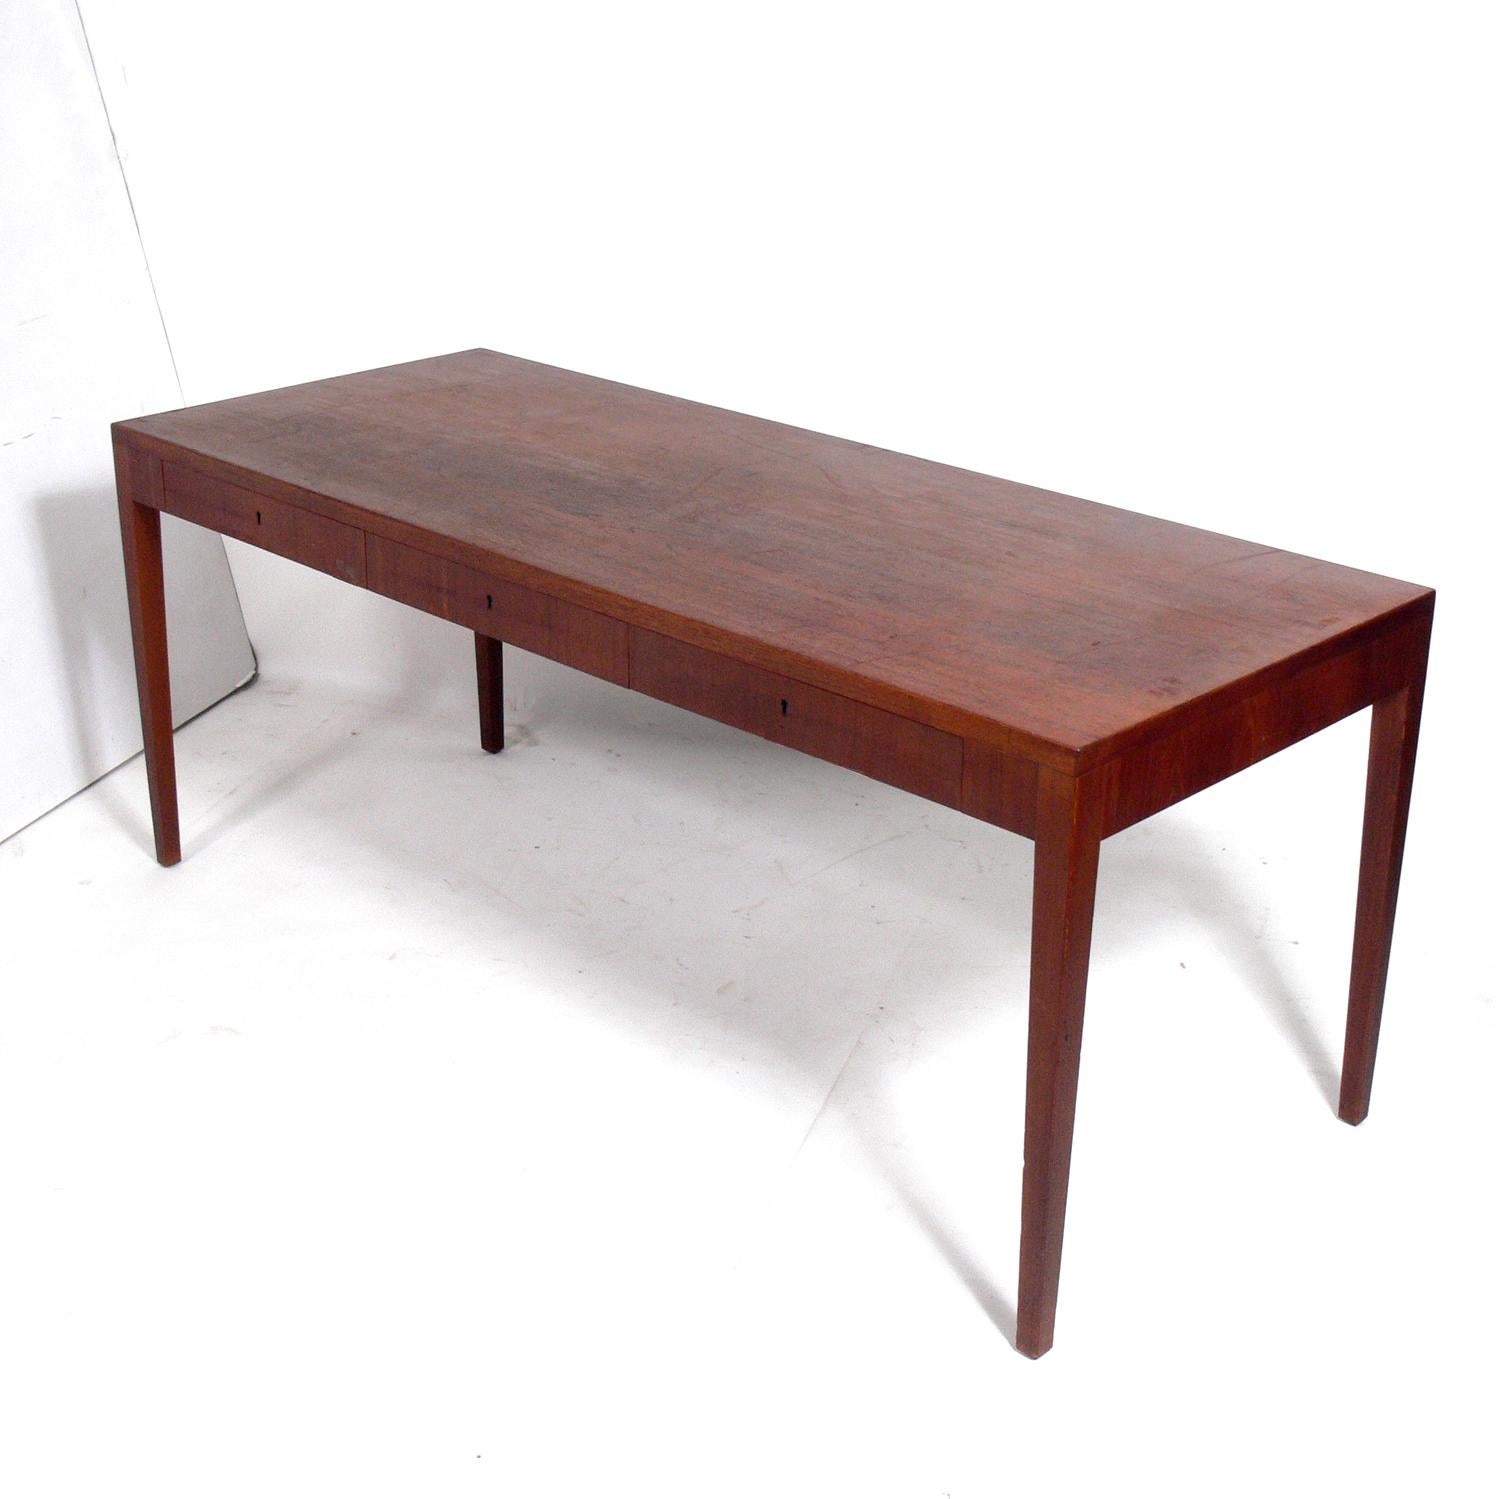 Clean lined Danish modern teak desk, designed by, branded underneath, Denmark, circa 1960s. This desk is currently being refinished and will look wonderful when completed.